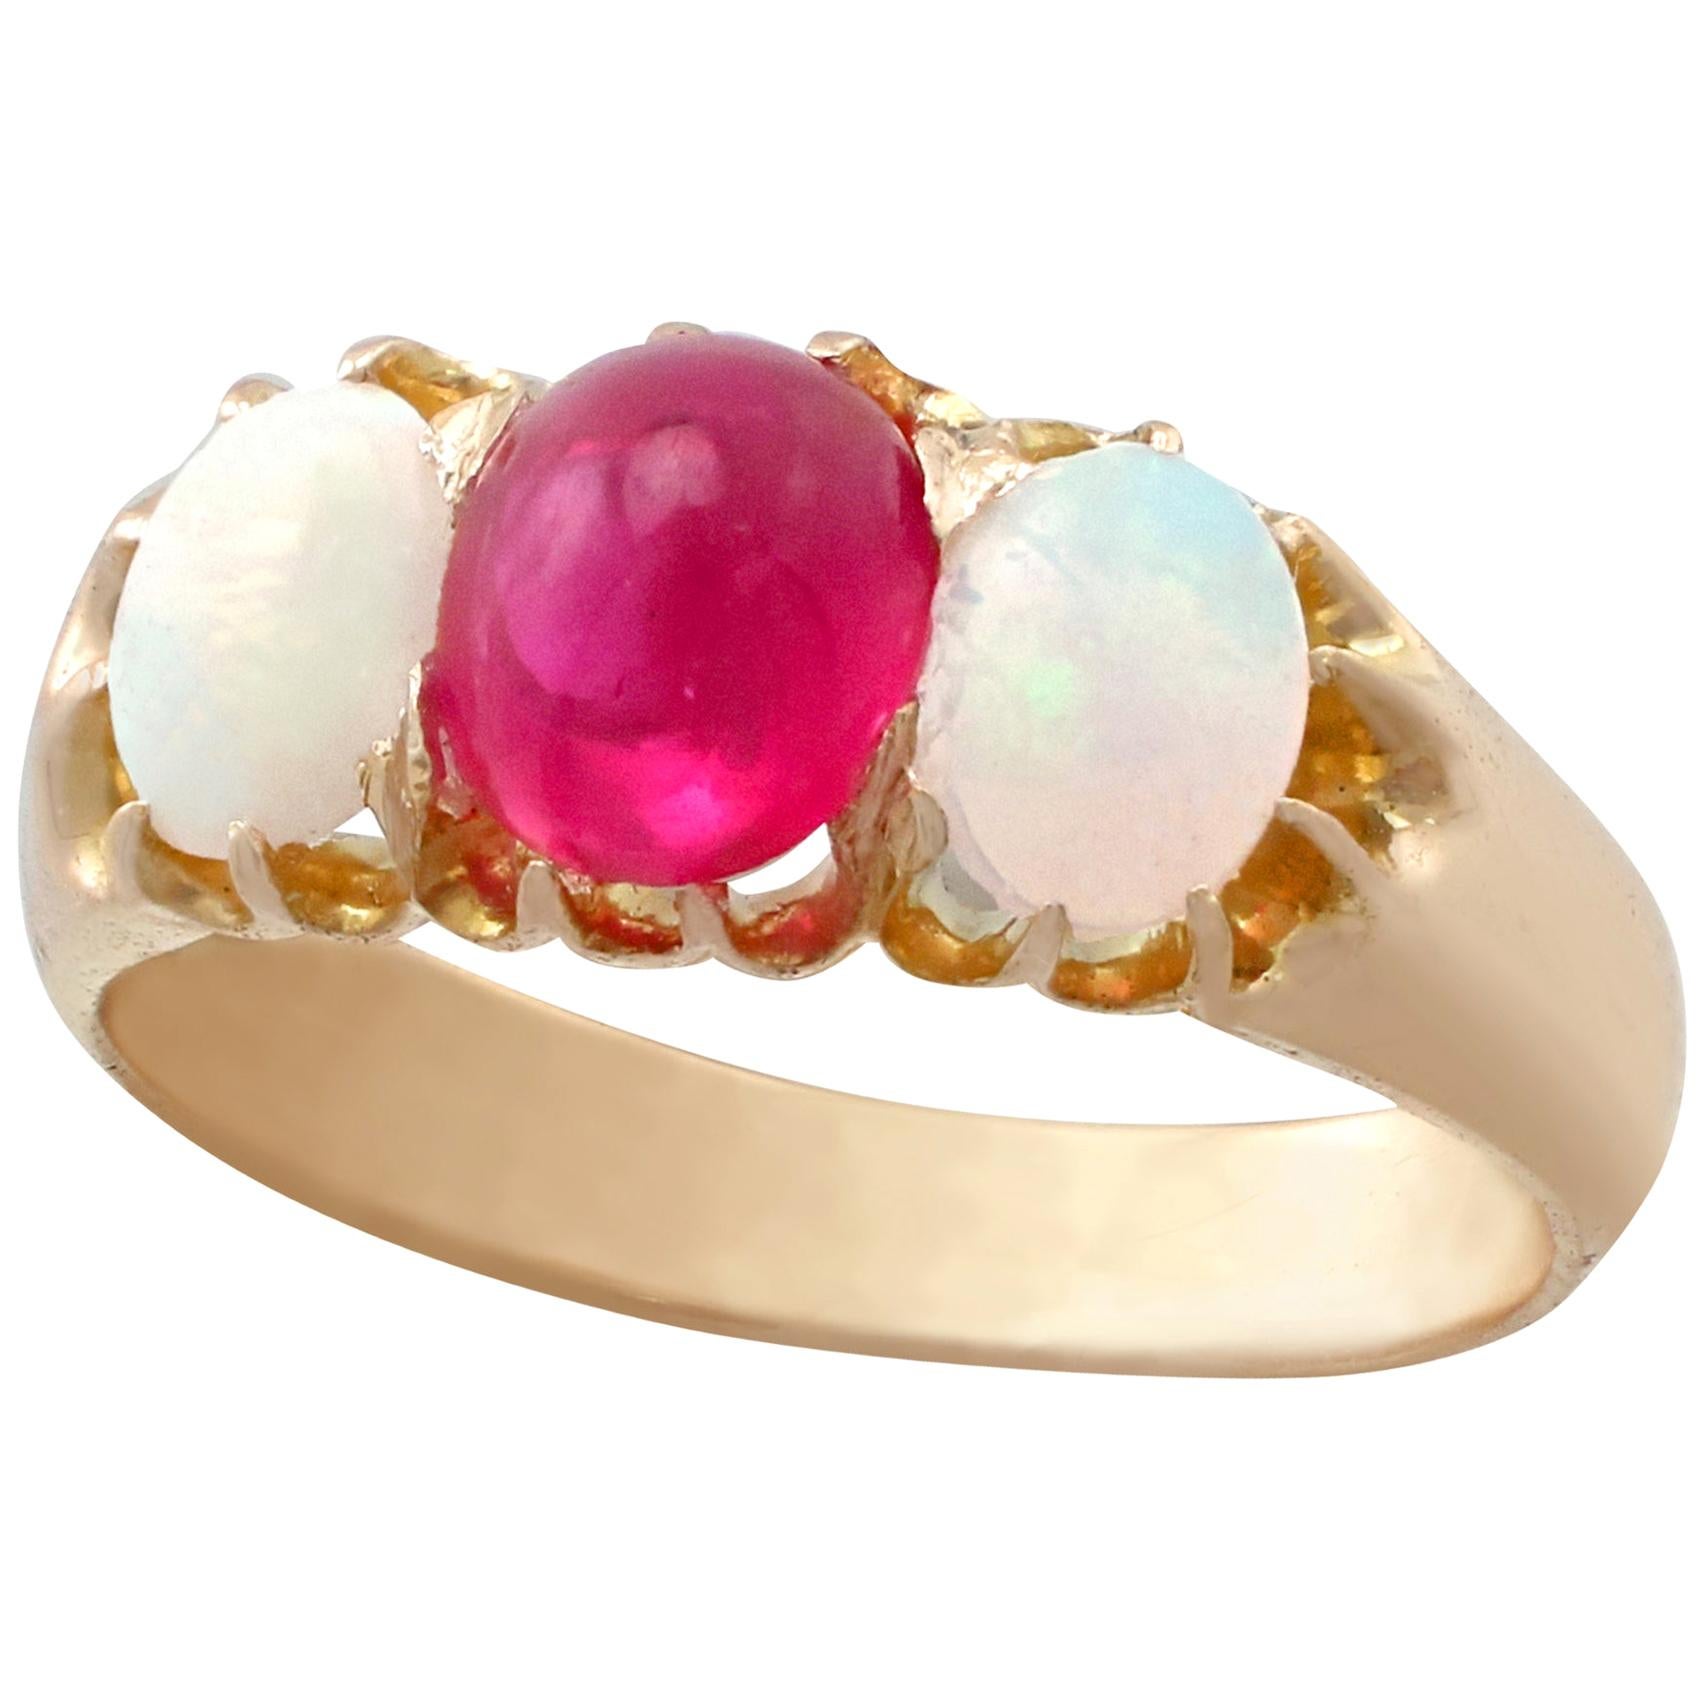 Antique 1890s Cabochon Cut Ruby and Opal Yellow Gold Trilogy Ring